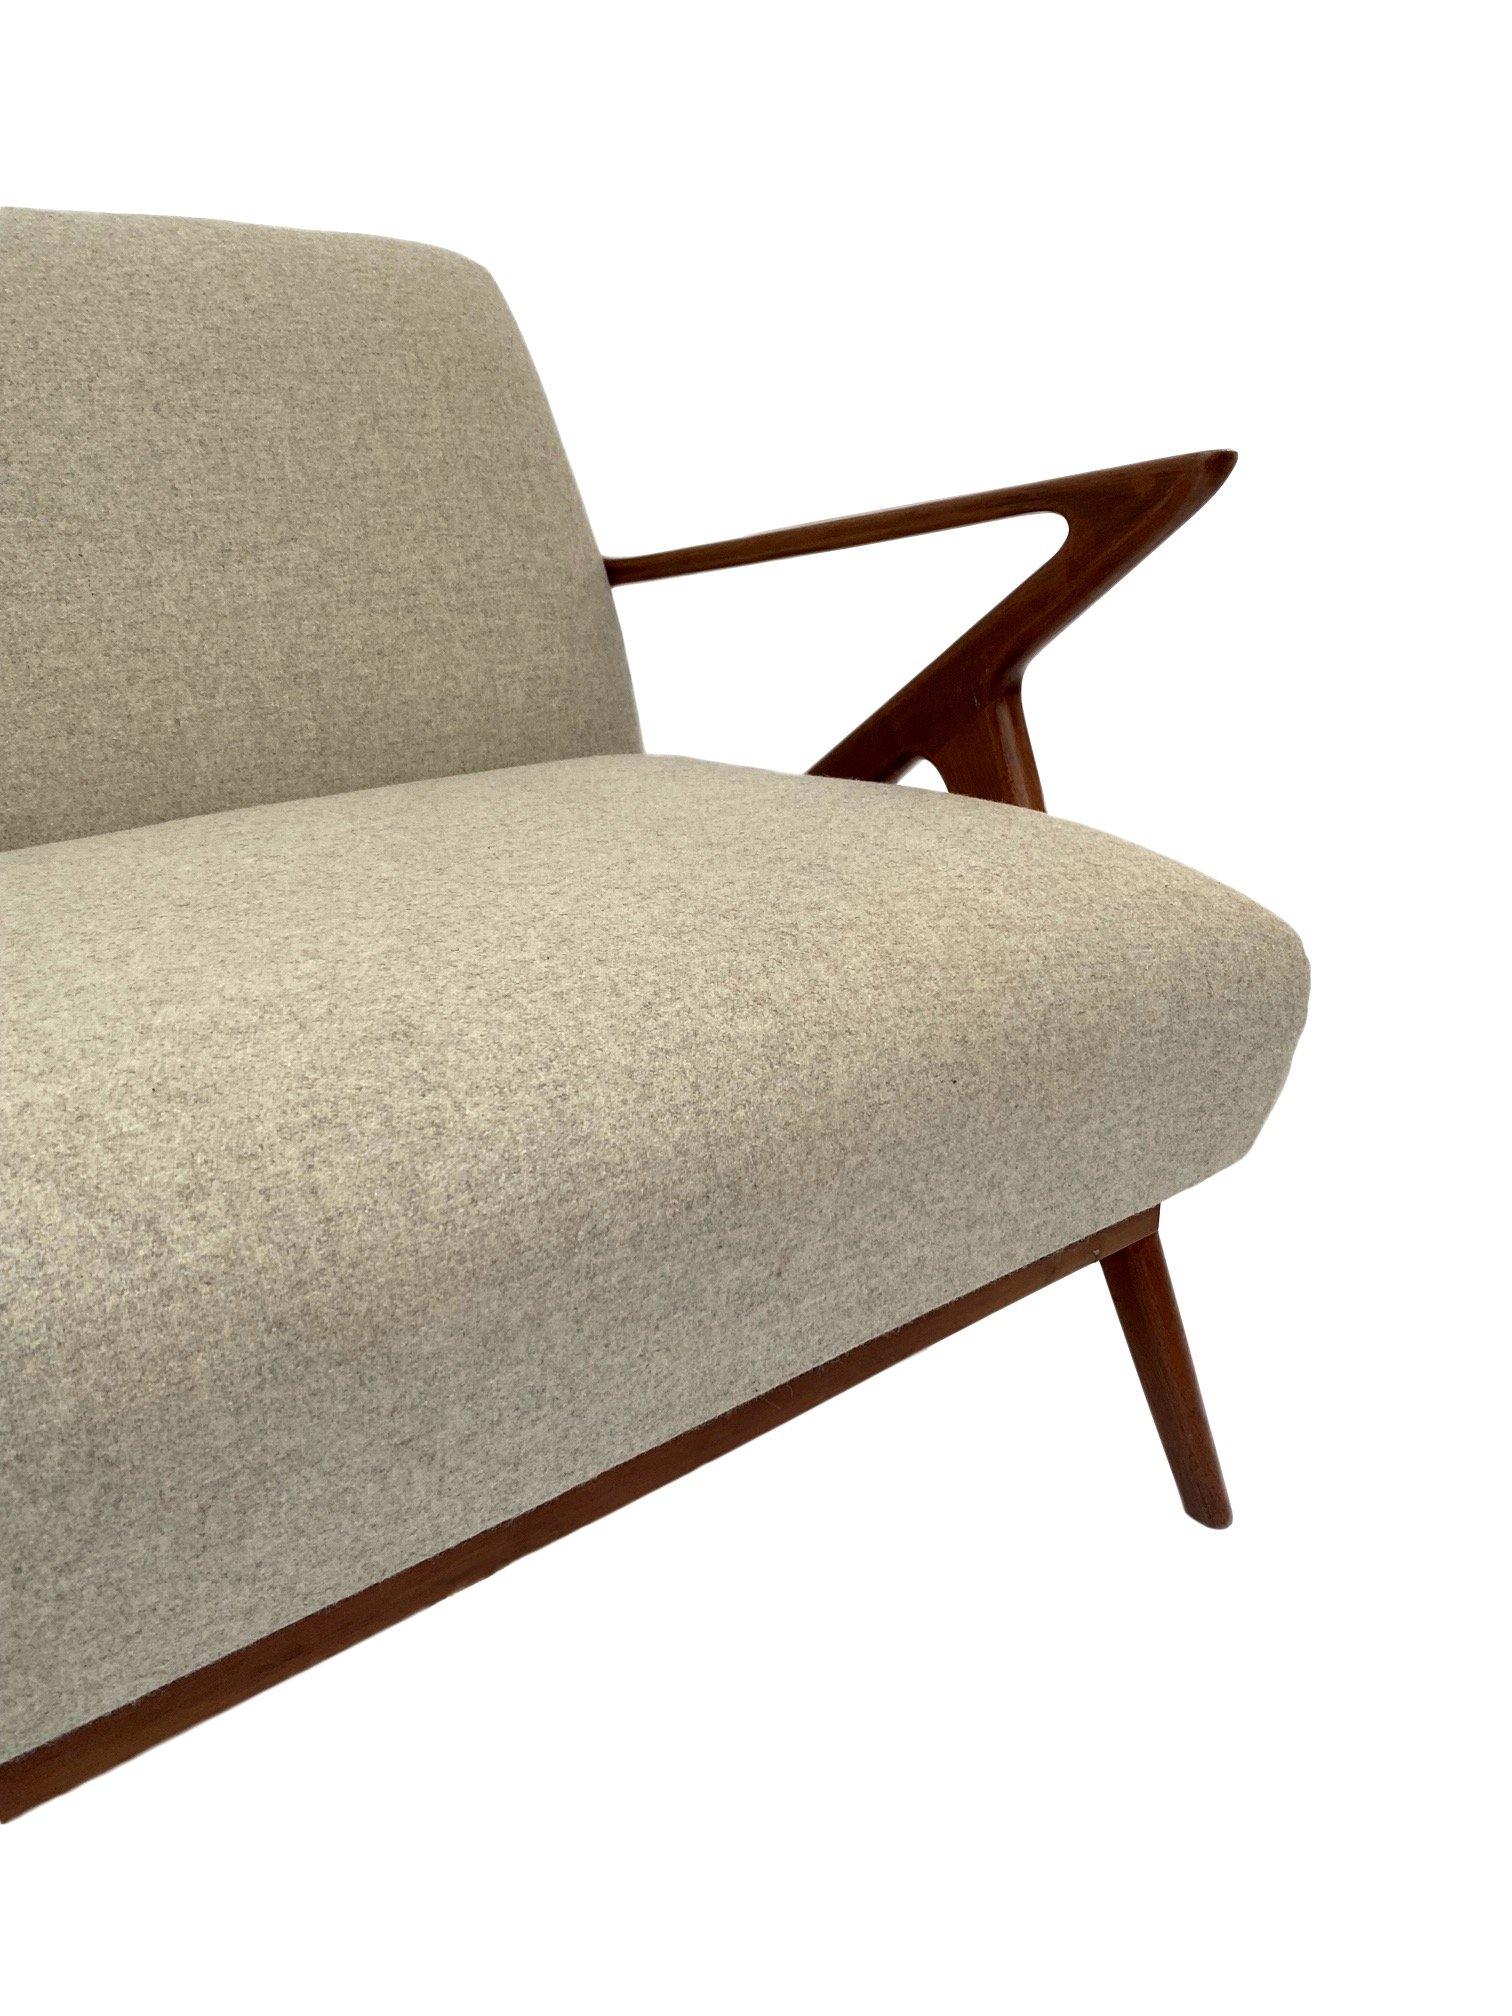 Poul Jensen Model 'Z' Cream Wool and Teak 3 Seater Sofabed for Selig Ope Danish 10